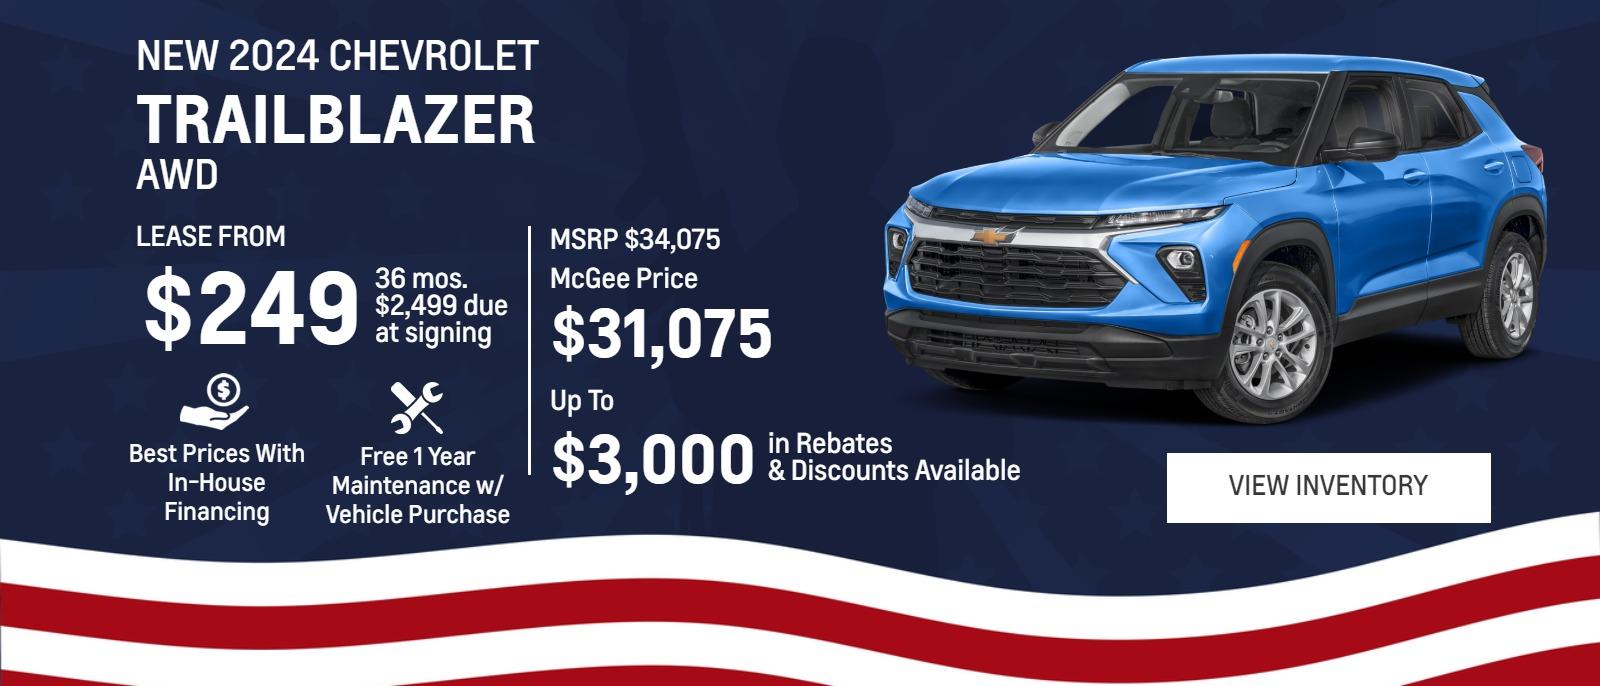 New 2024 Chevrolet
Trailblazer AWD

Lease From
$249
36 mos.
$2,499 due
at signing

MSRP $34,075
McGee Price
$31,075
Up To
$3,000 
in Rebates
&Discounts Available

Best Prices With In-House Financing

Free 1 Year Maintenance
w/ Vehicle Purchase